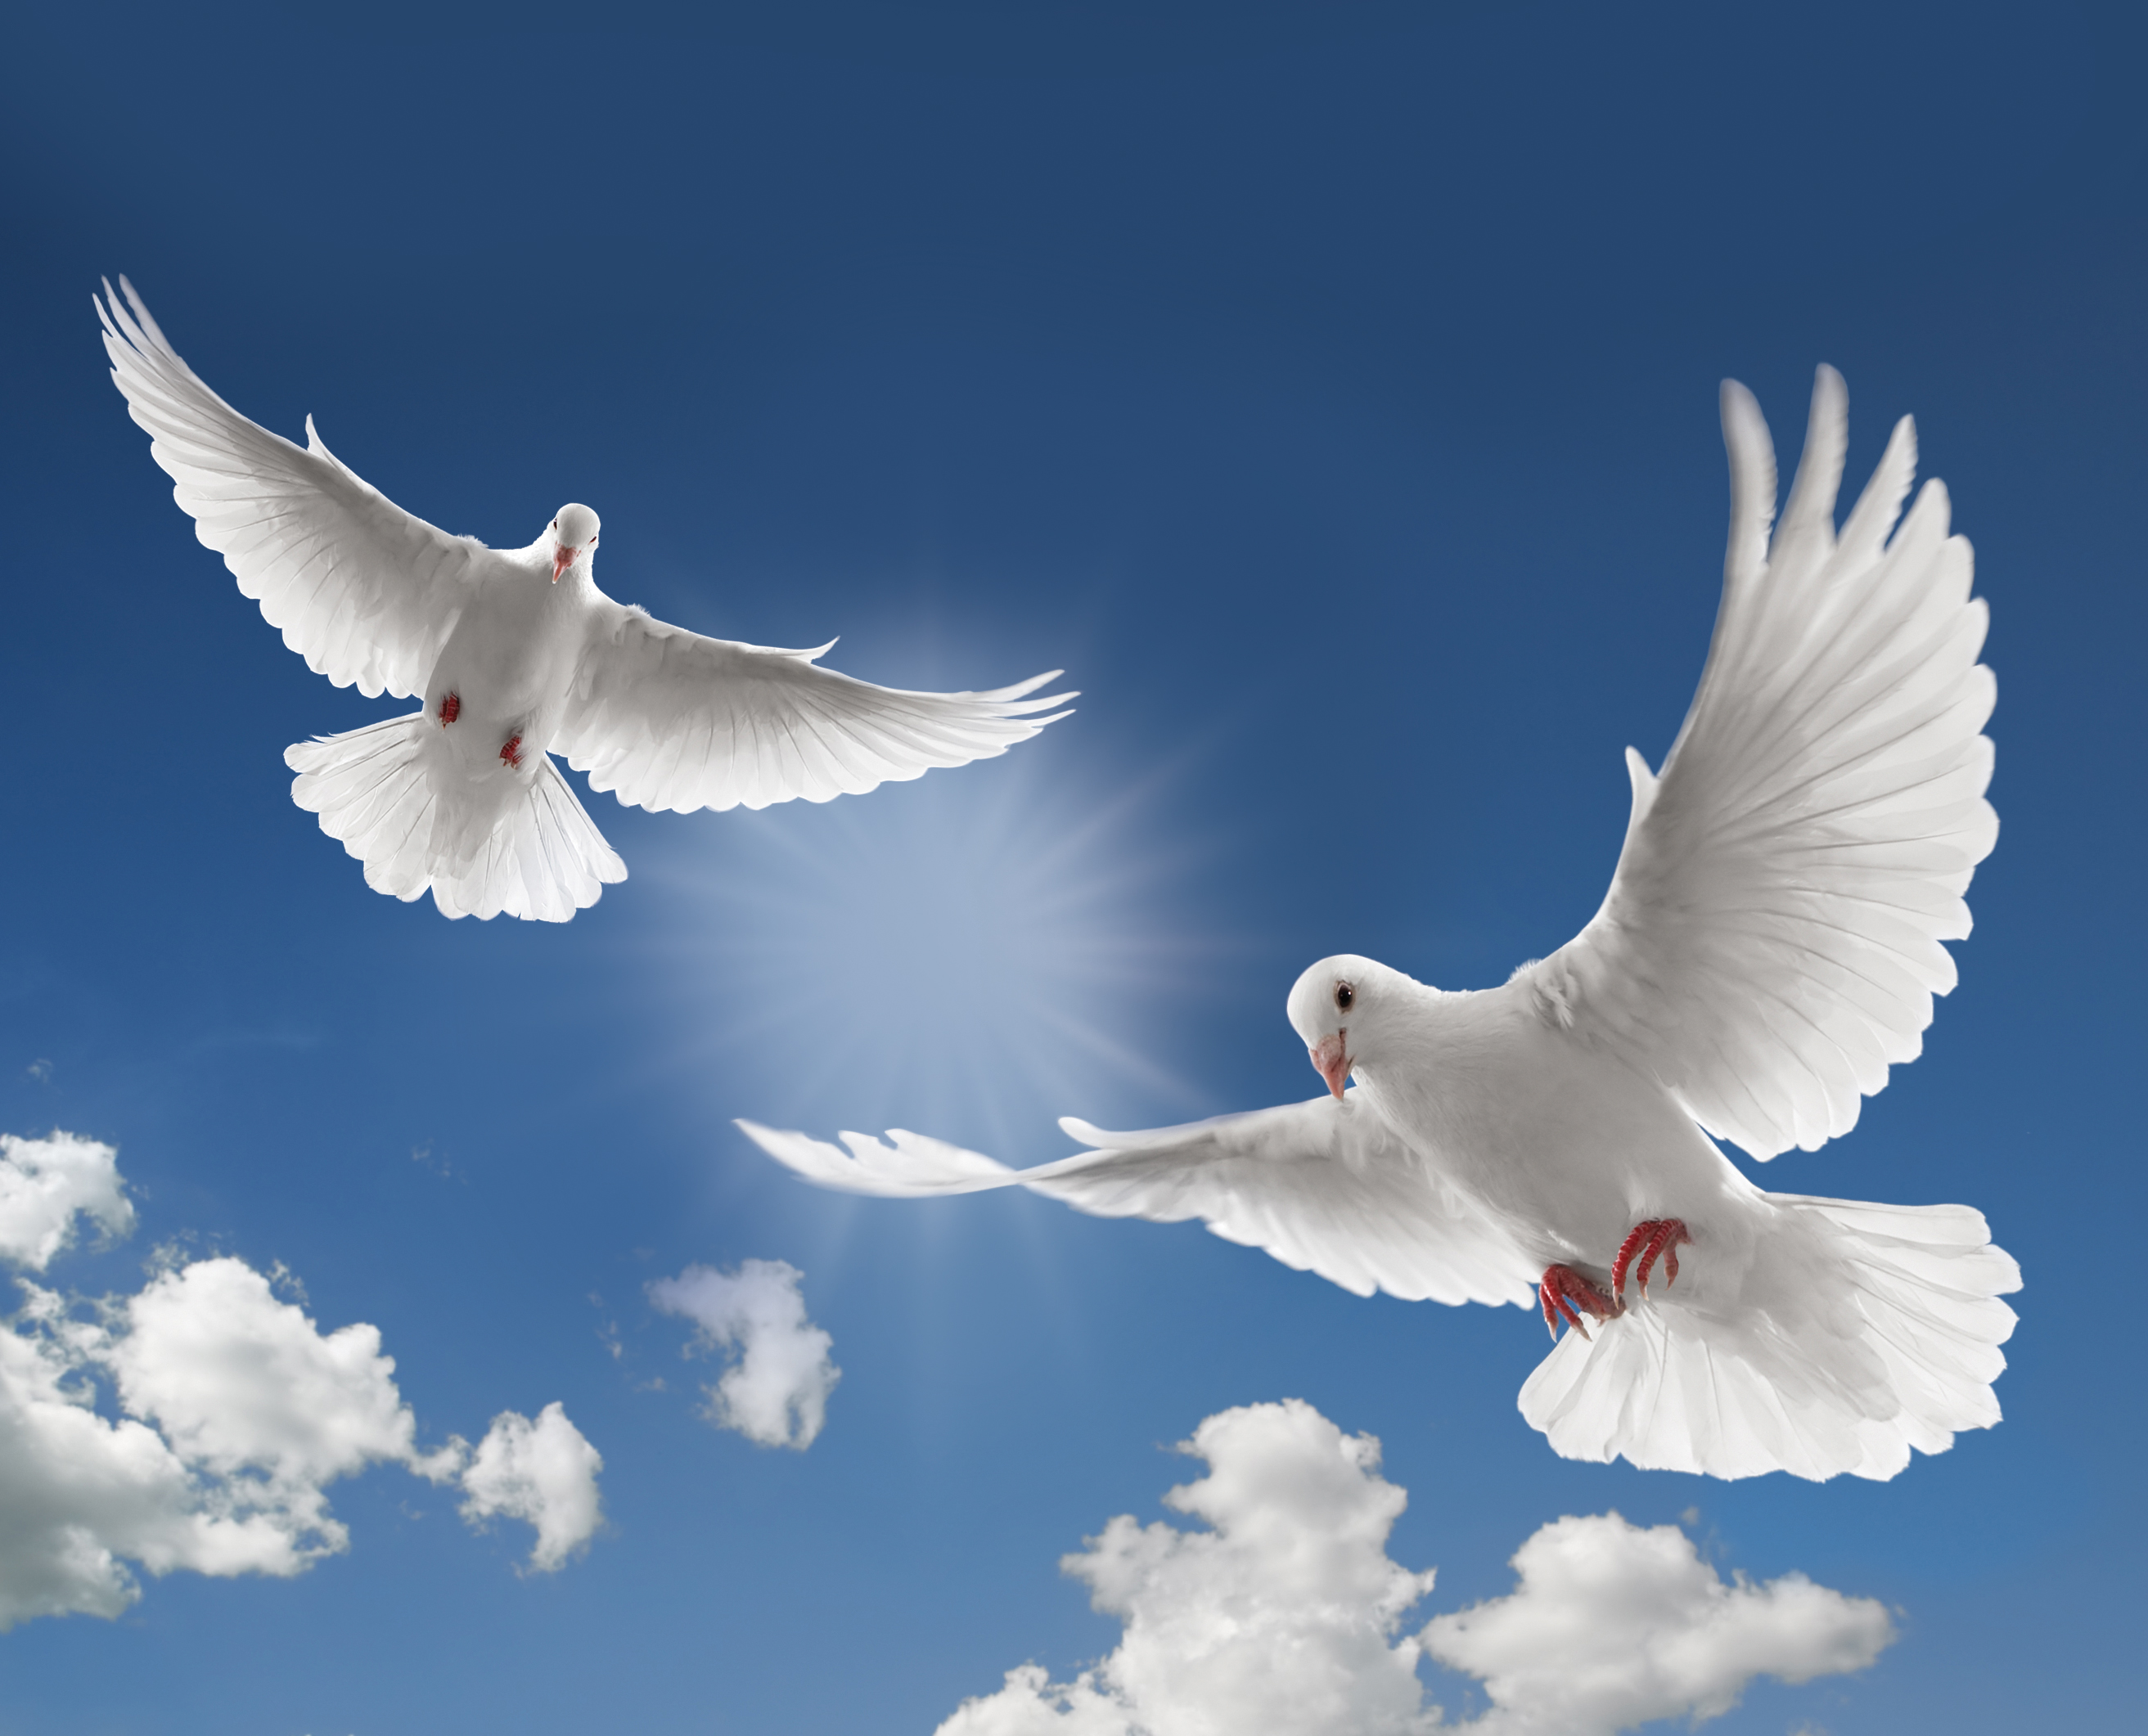 Funeral doves